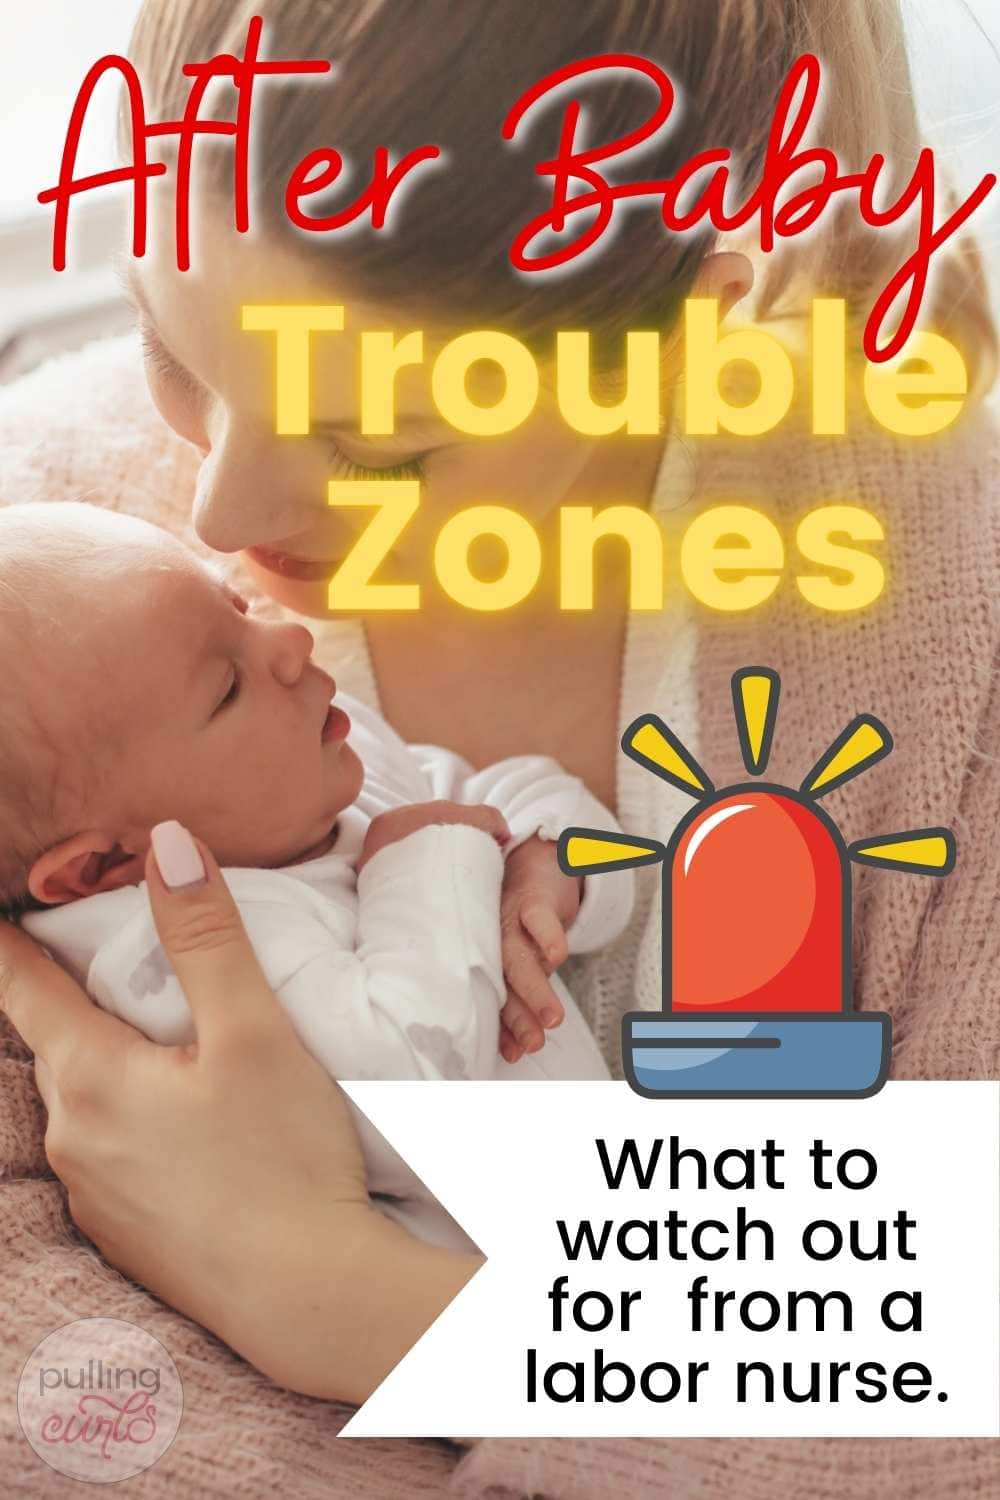 So often we think once the baby is out, our health issues are over. BUT there are a few trouble zones that you need to watch for (and it's hard not to get so wrapped up in the baby). via @pullingcurls